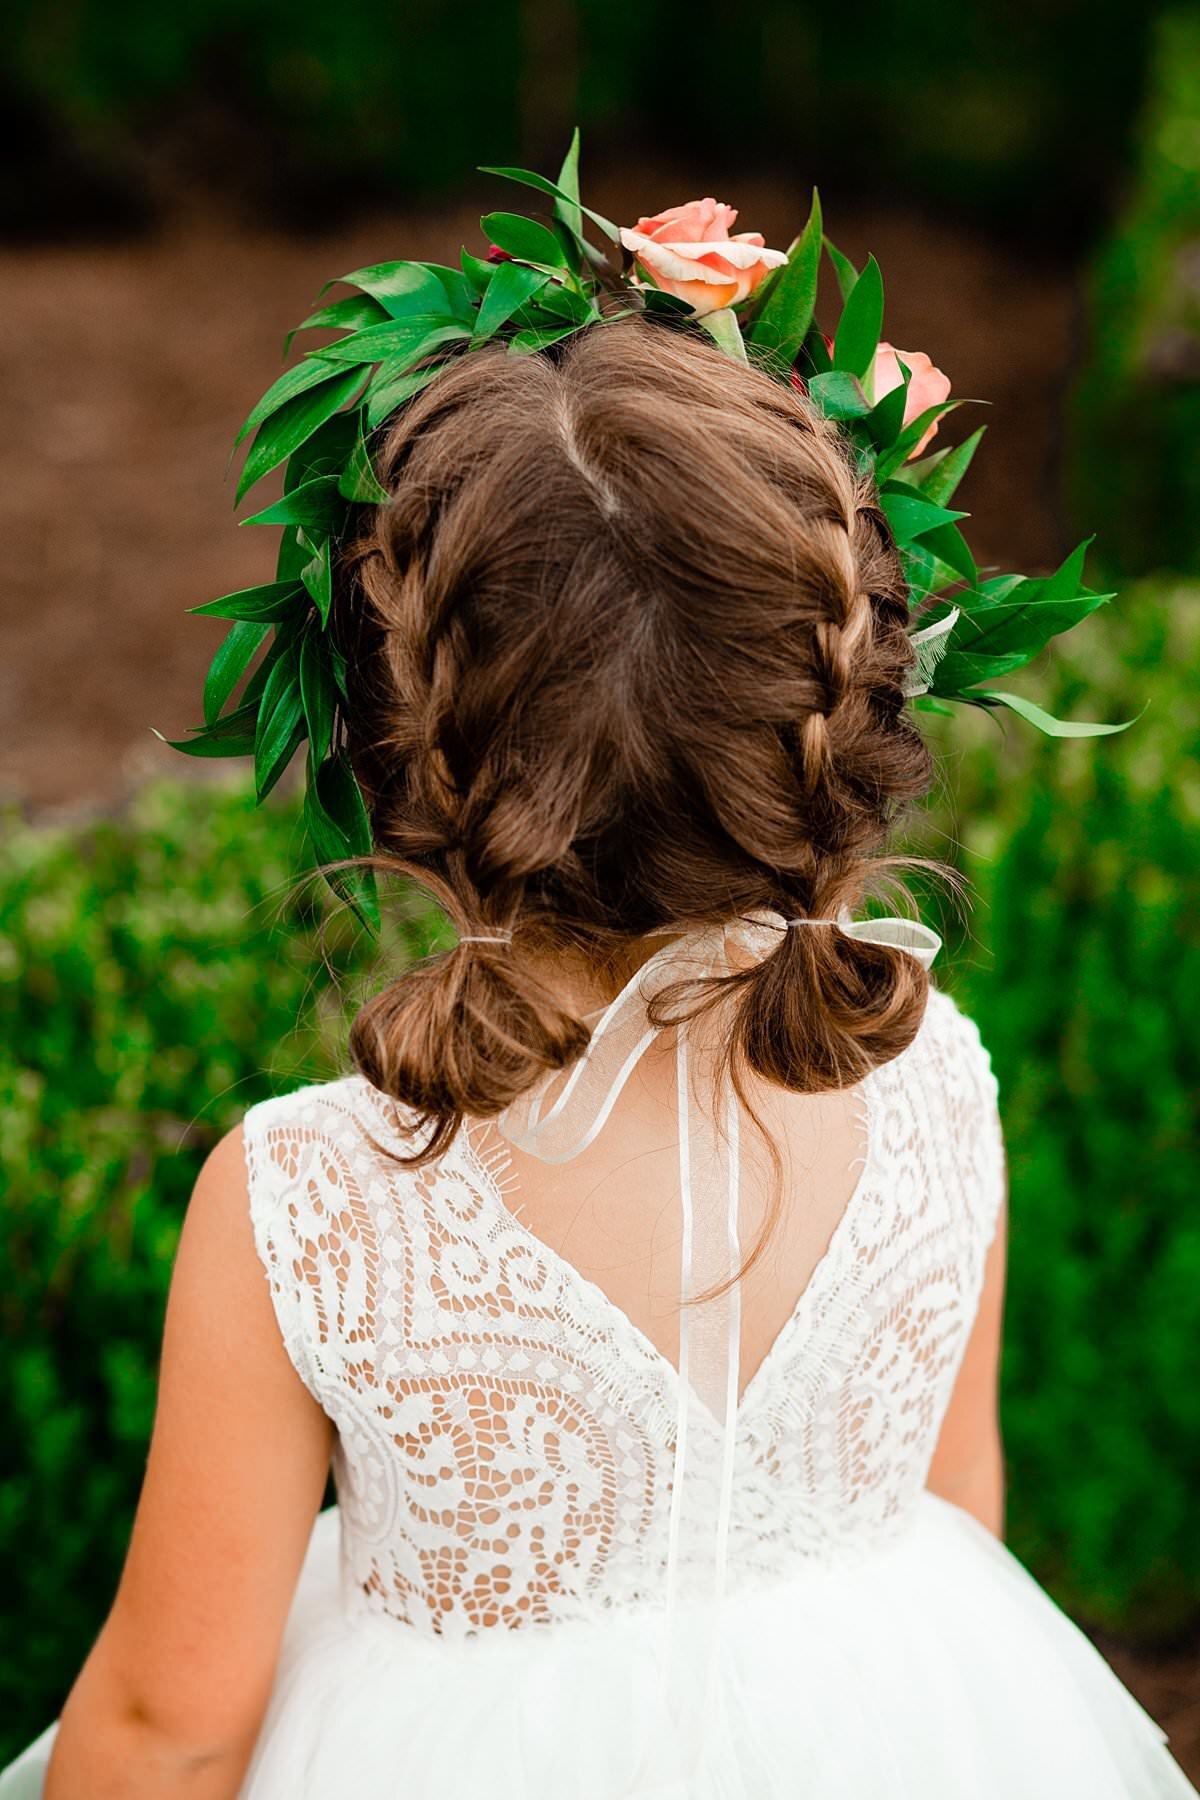 Braids and flower crown on flower girl